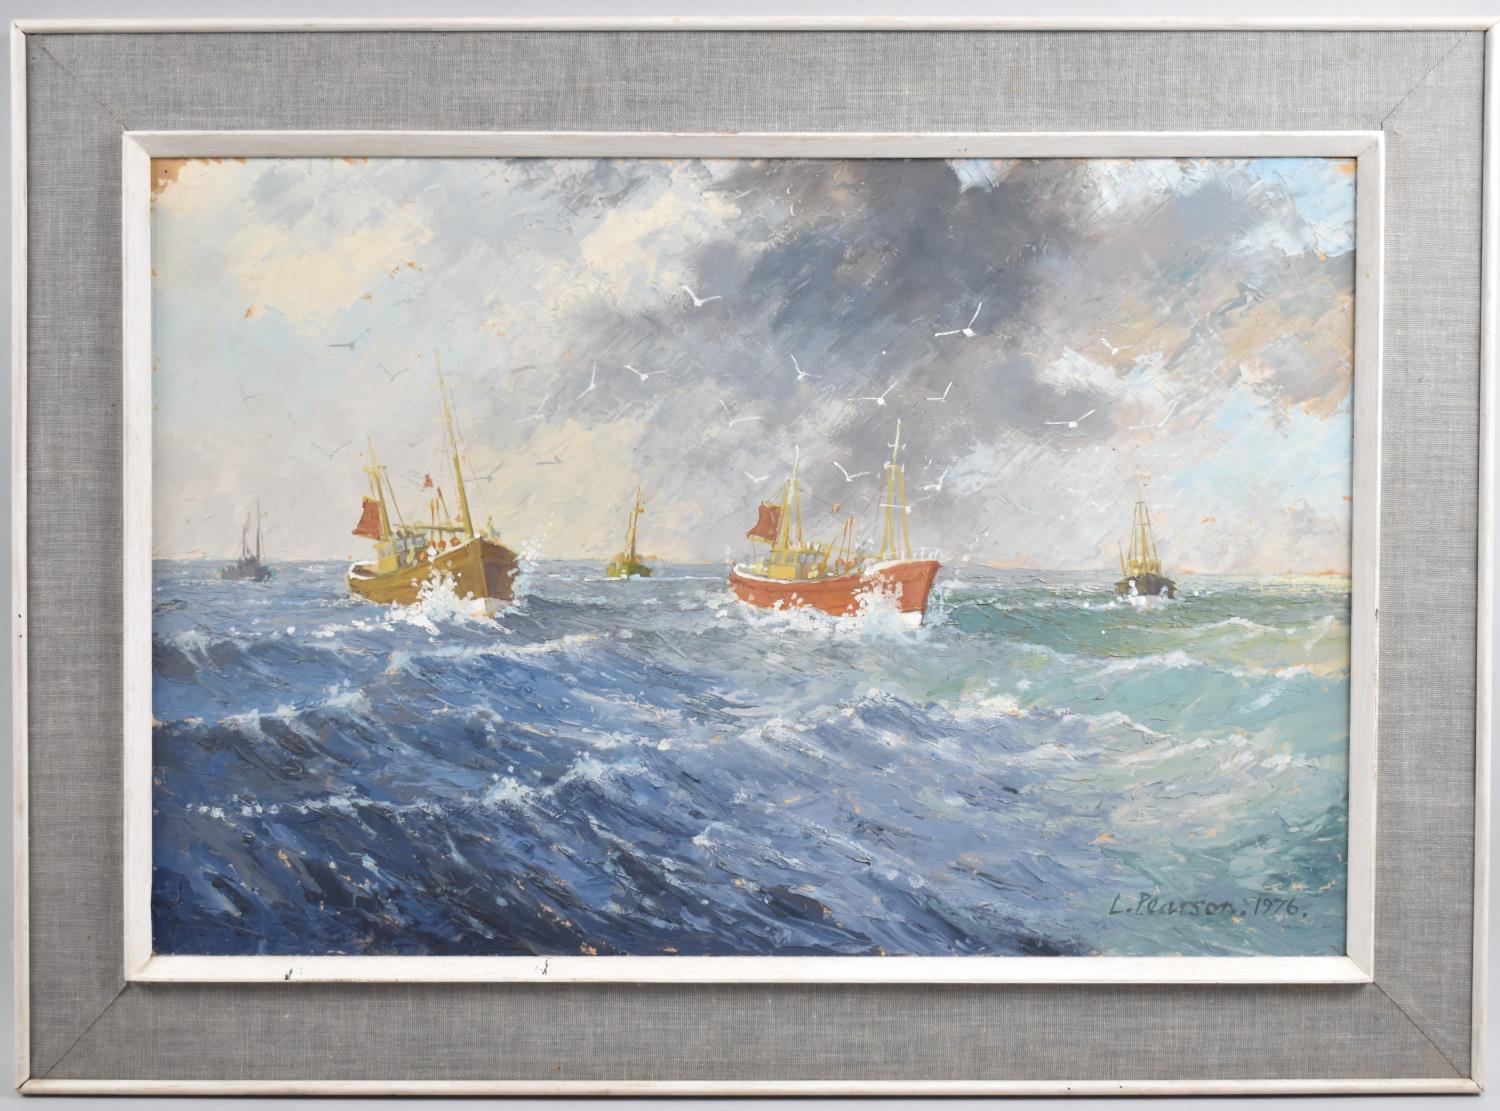 A Framed Oil on Board Depicting Fishing Boats Returning to harbour in Stormy Seas, Signed L